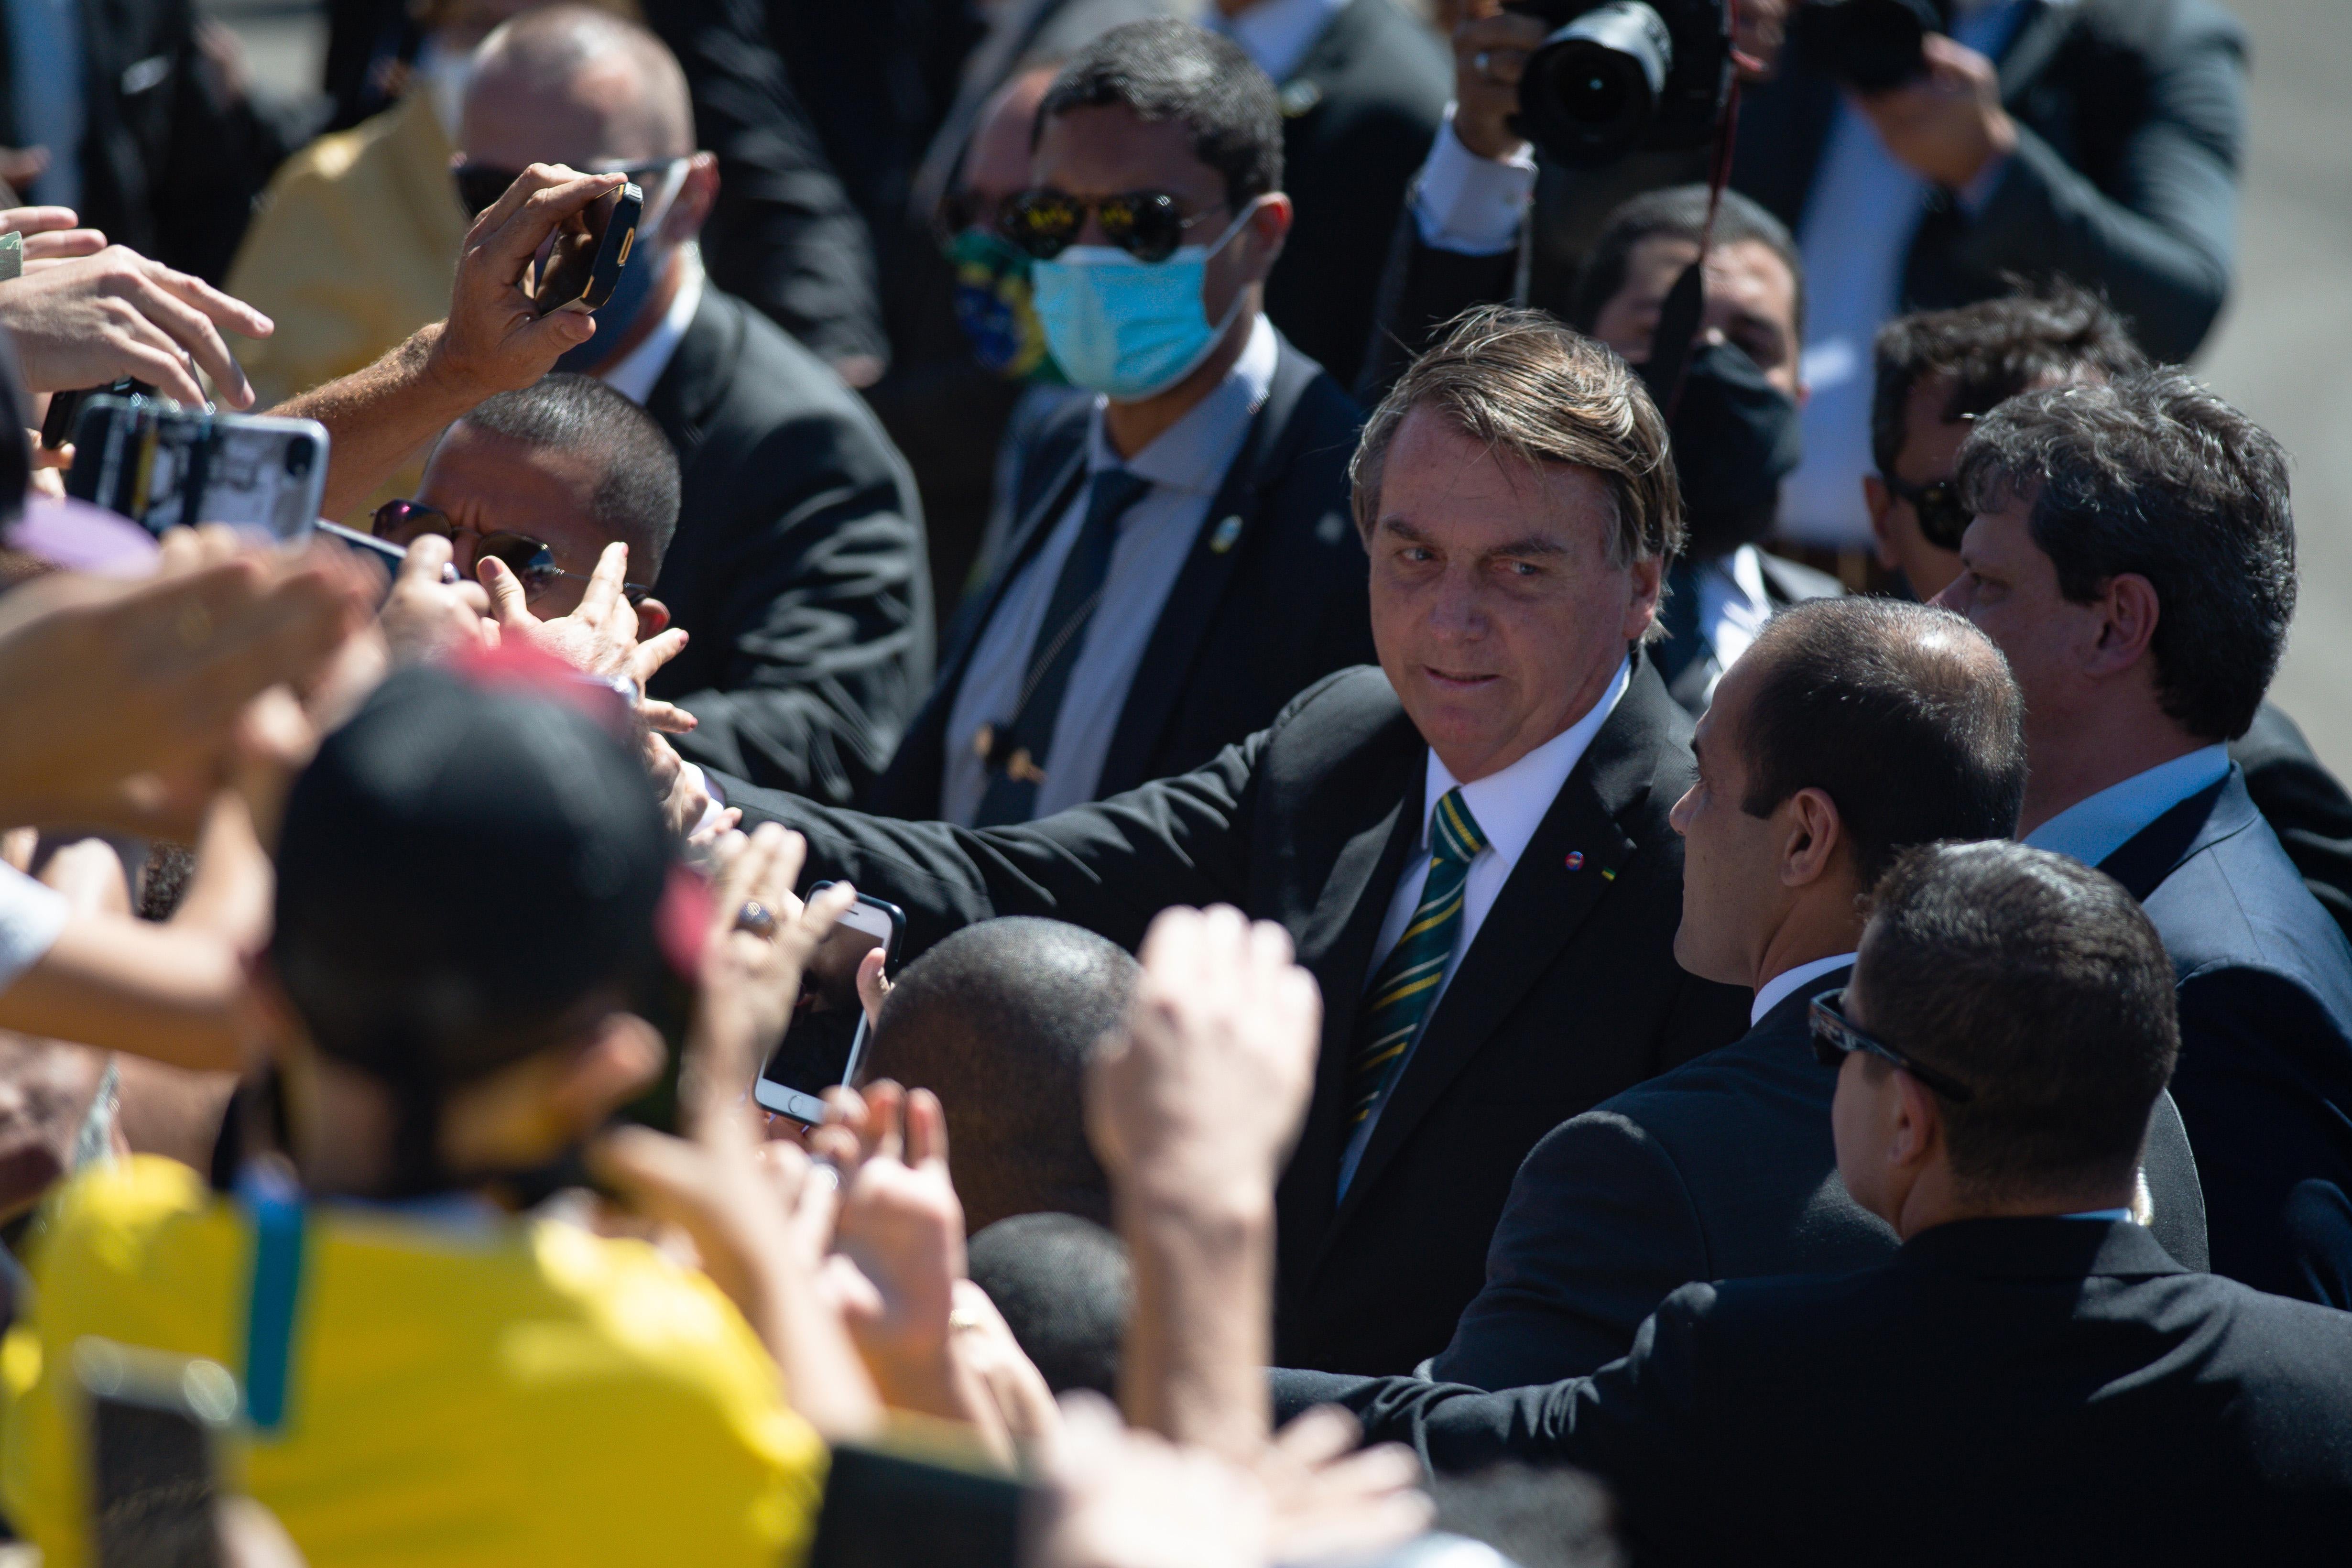 Bolsonaro, not wearing a mask, greets a crowd of his supporters